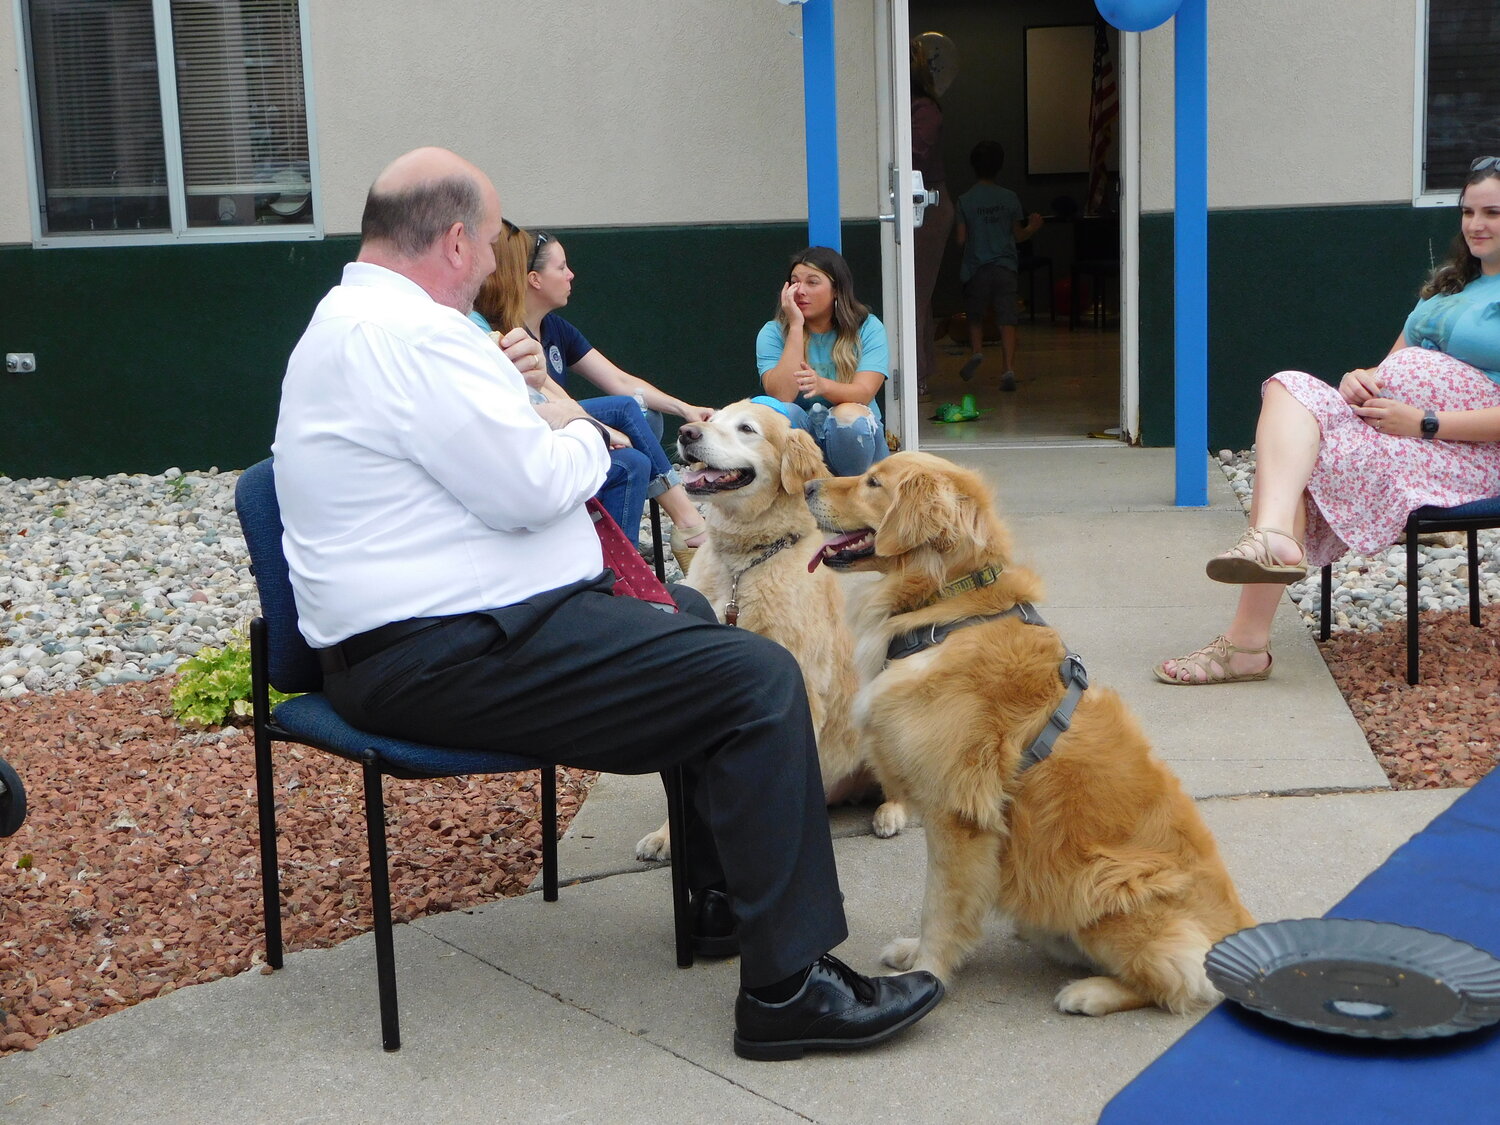 Tom Evans, chief assistant prosecuting attorney, shares a moment discussing the merits of “sharing one more hot dog” with his golden retriever, Joe, and the dog of the hour, Trigger.